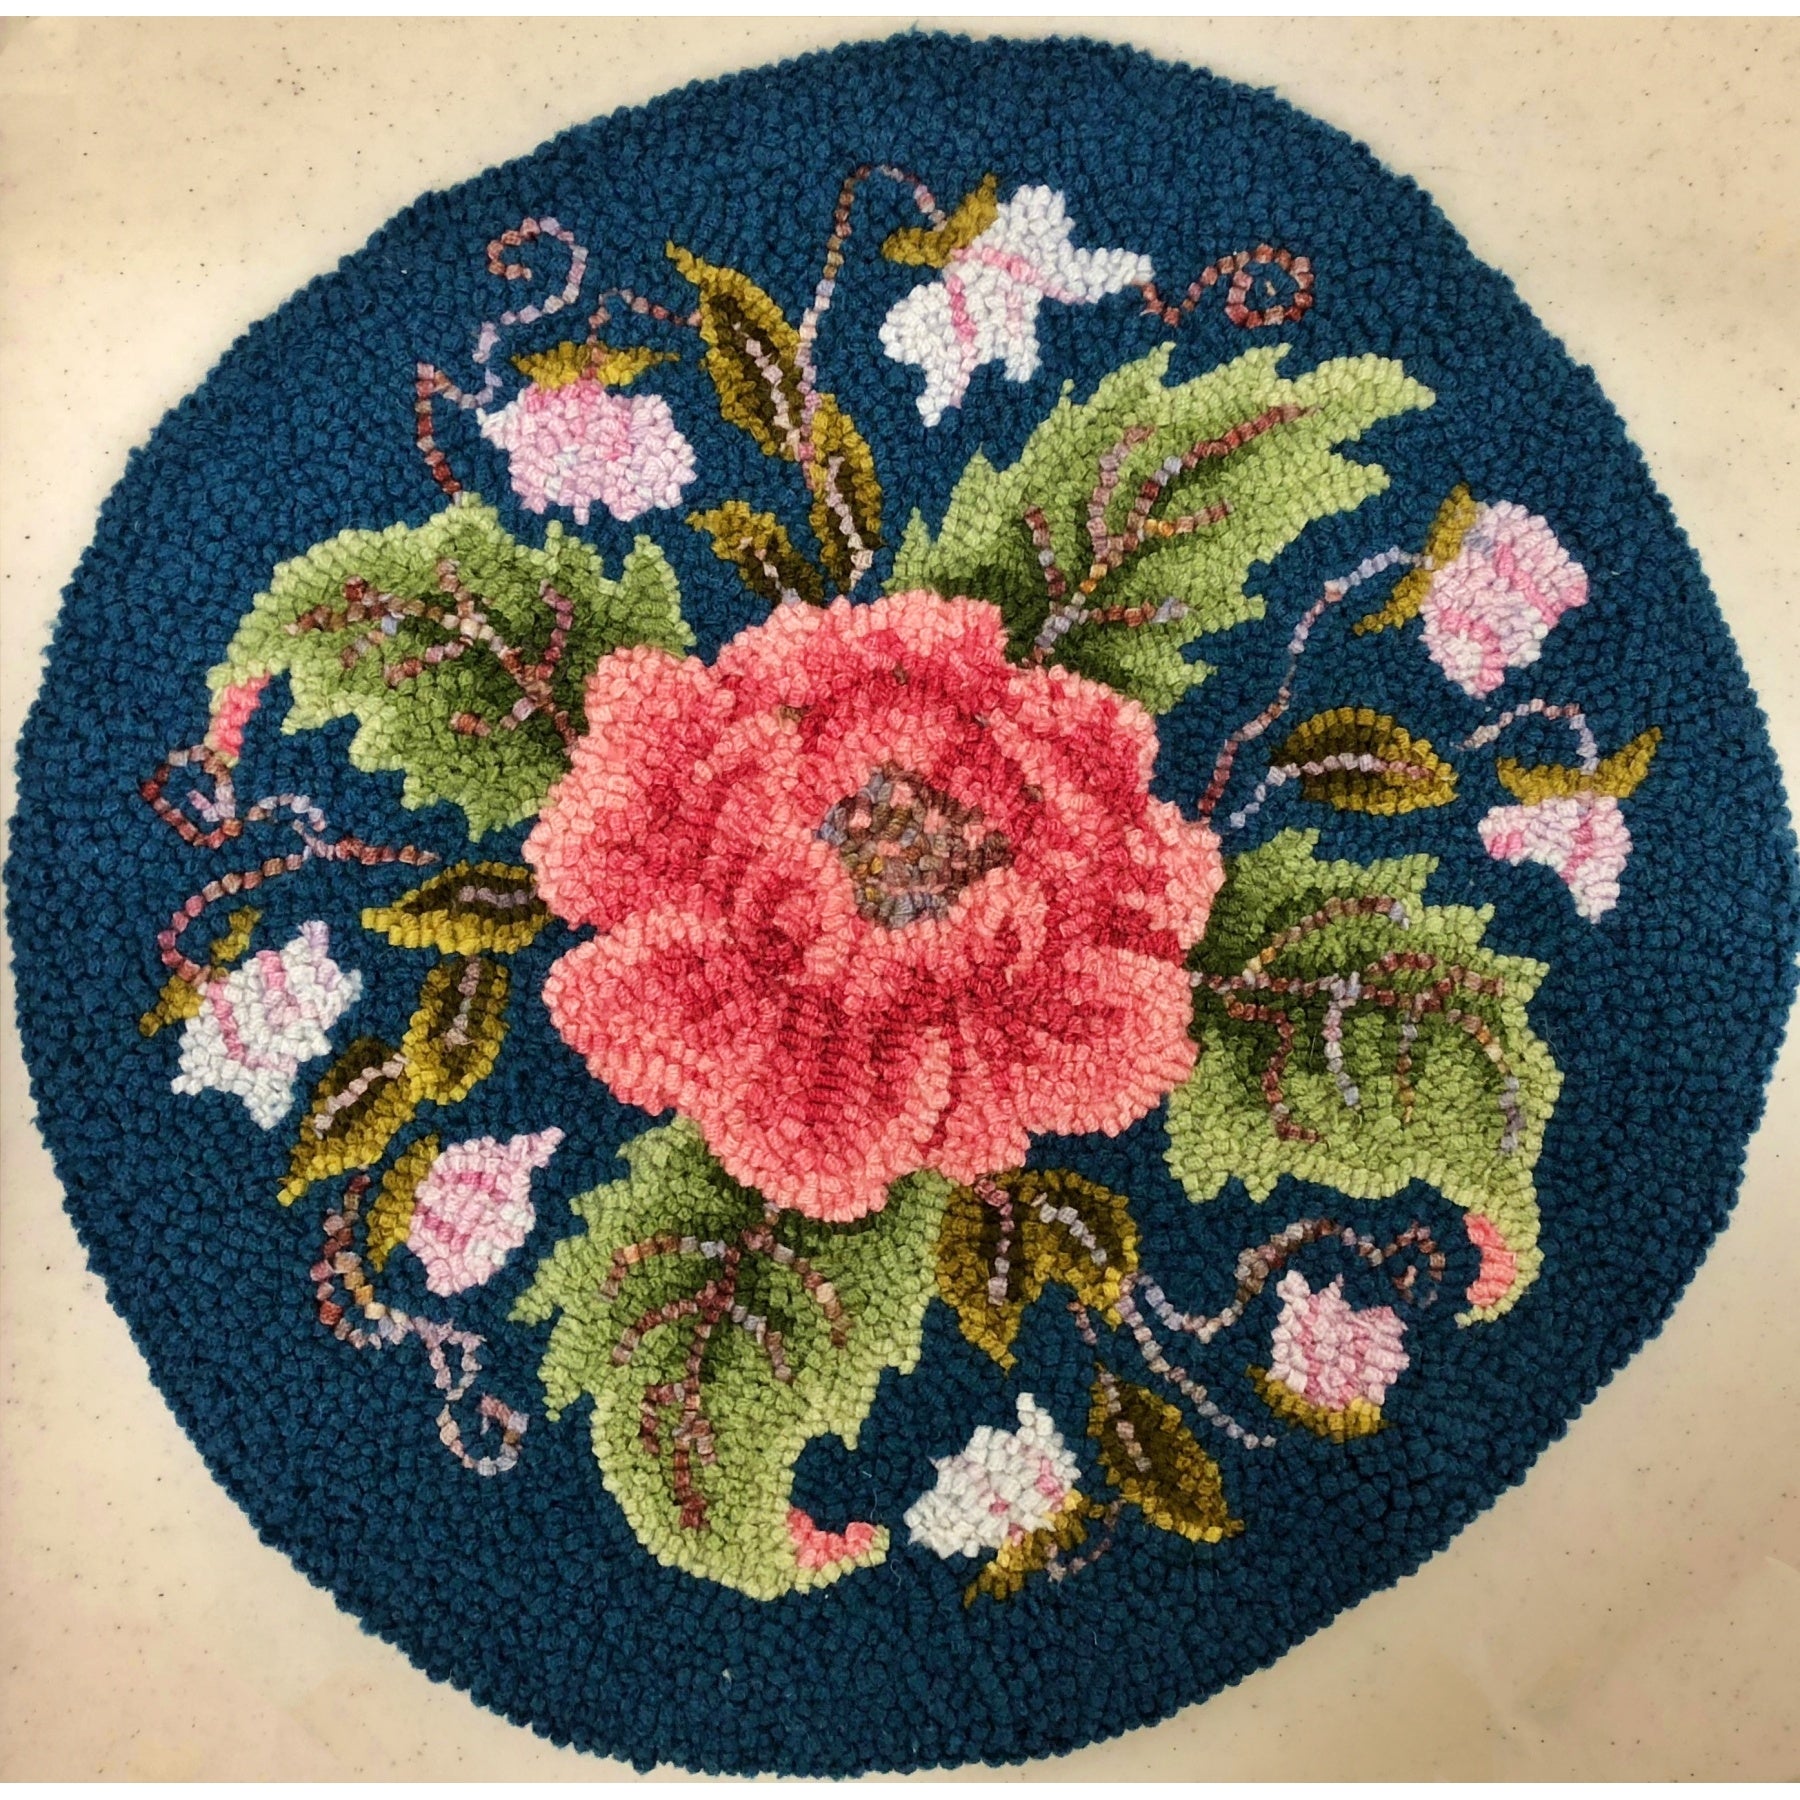 Ruthie Rose, rug hooked by Claudia Lampley